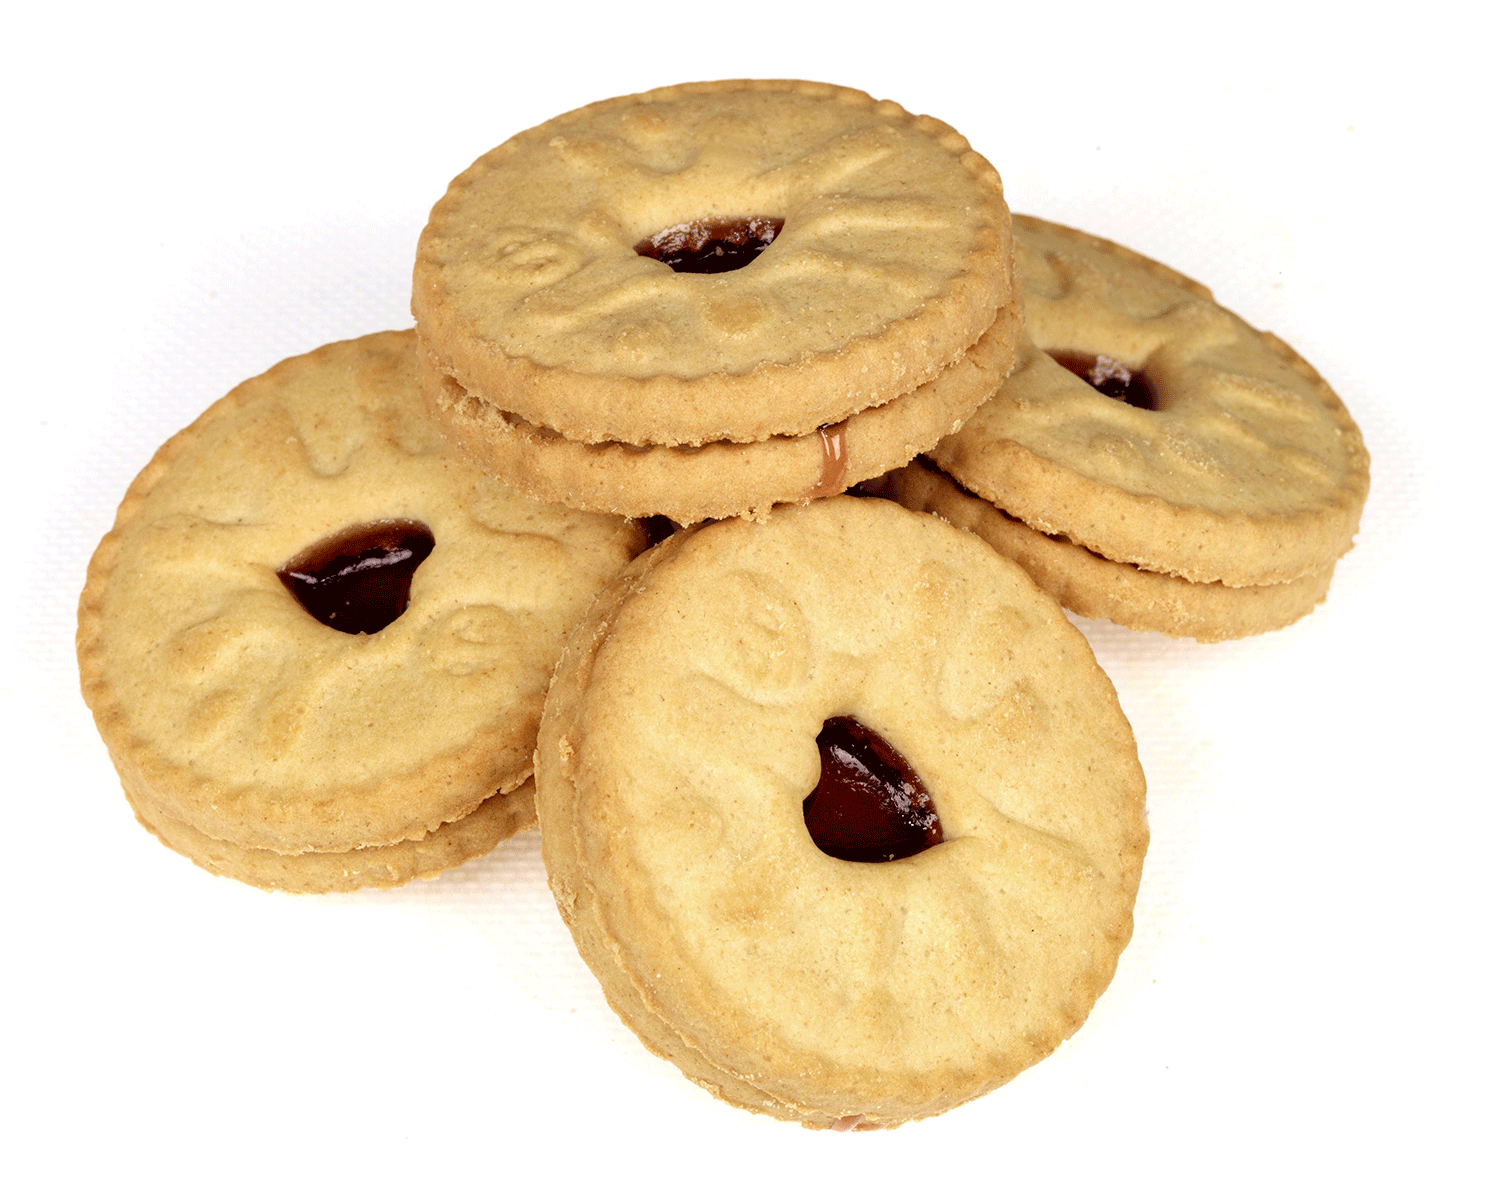 Jammie Dodgers have been around for 50 years